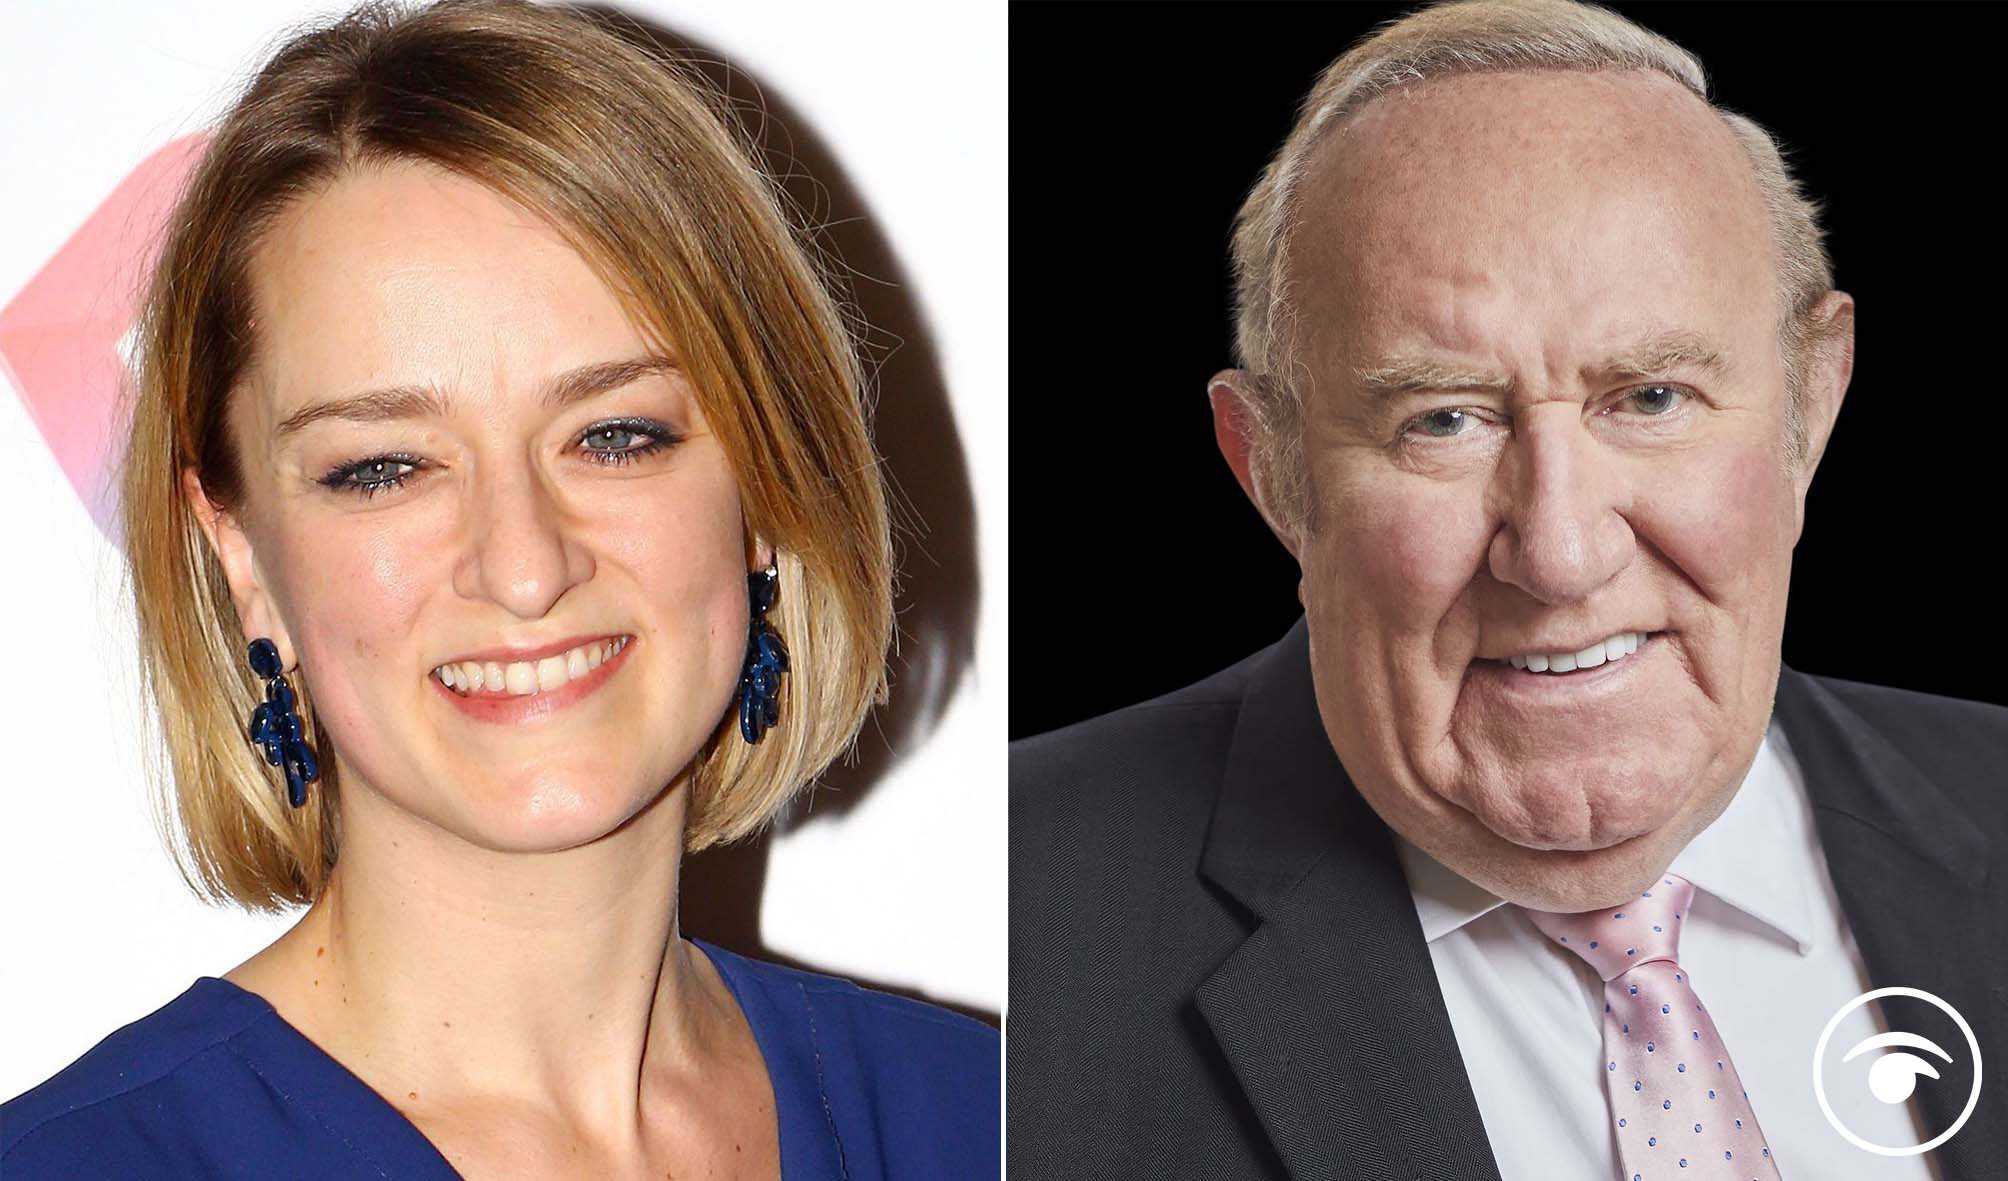 BBC: Laura Keunssberg & Andrew Neil emerging as front-runners to replace Marr